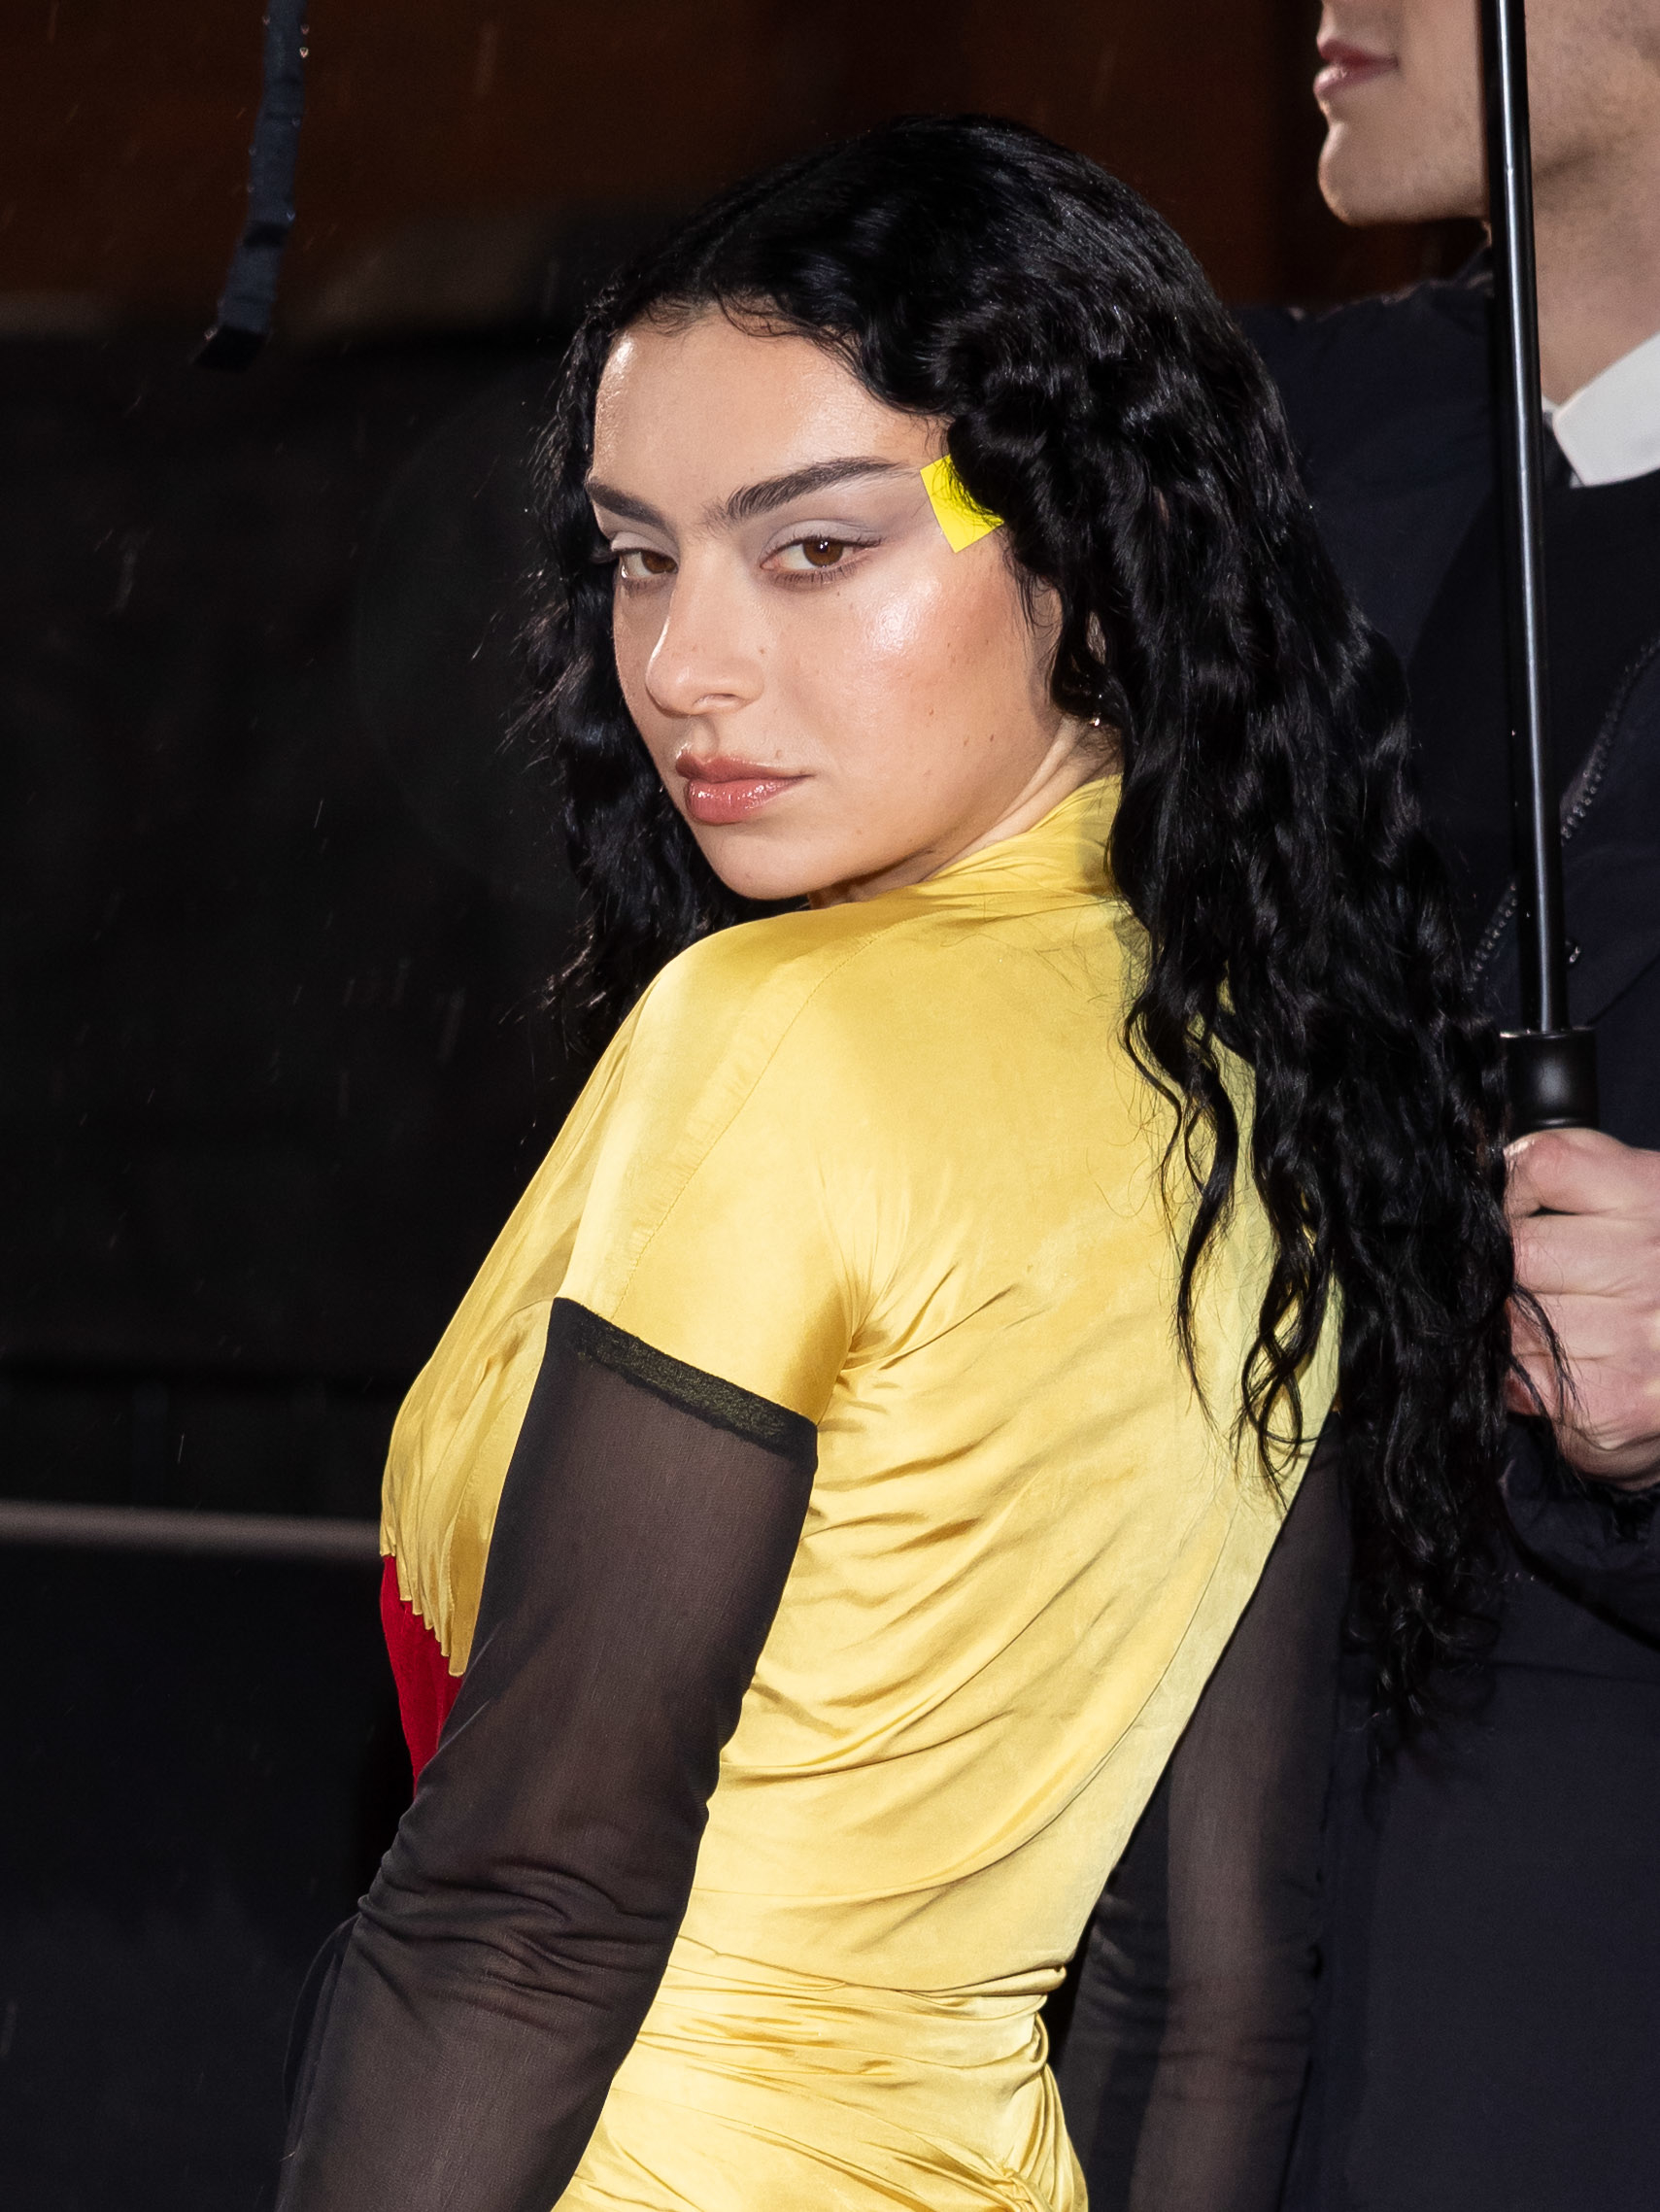 Charli XCX, wearing a unique yellow and black outfit with a red accent, poses for a photo at an event